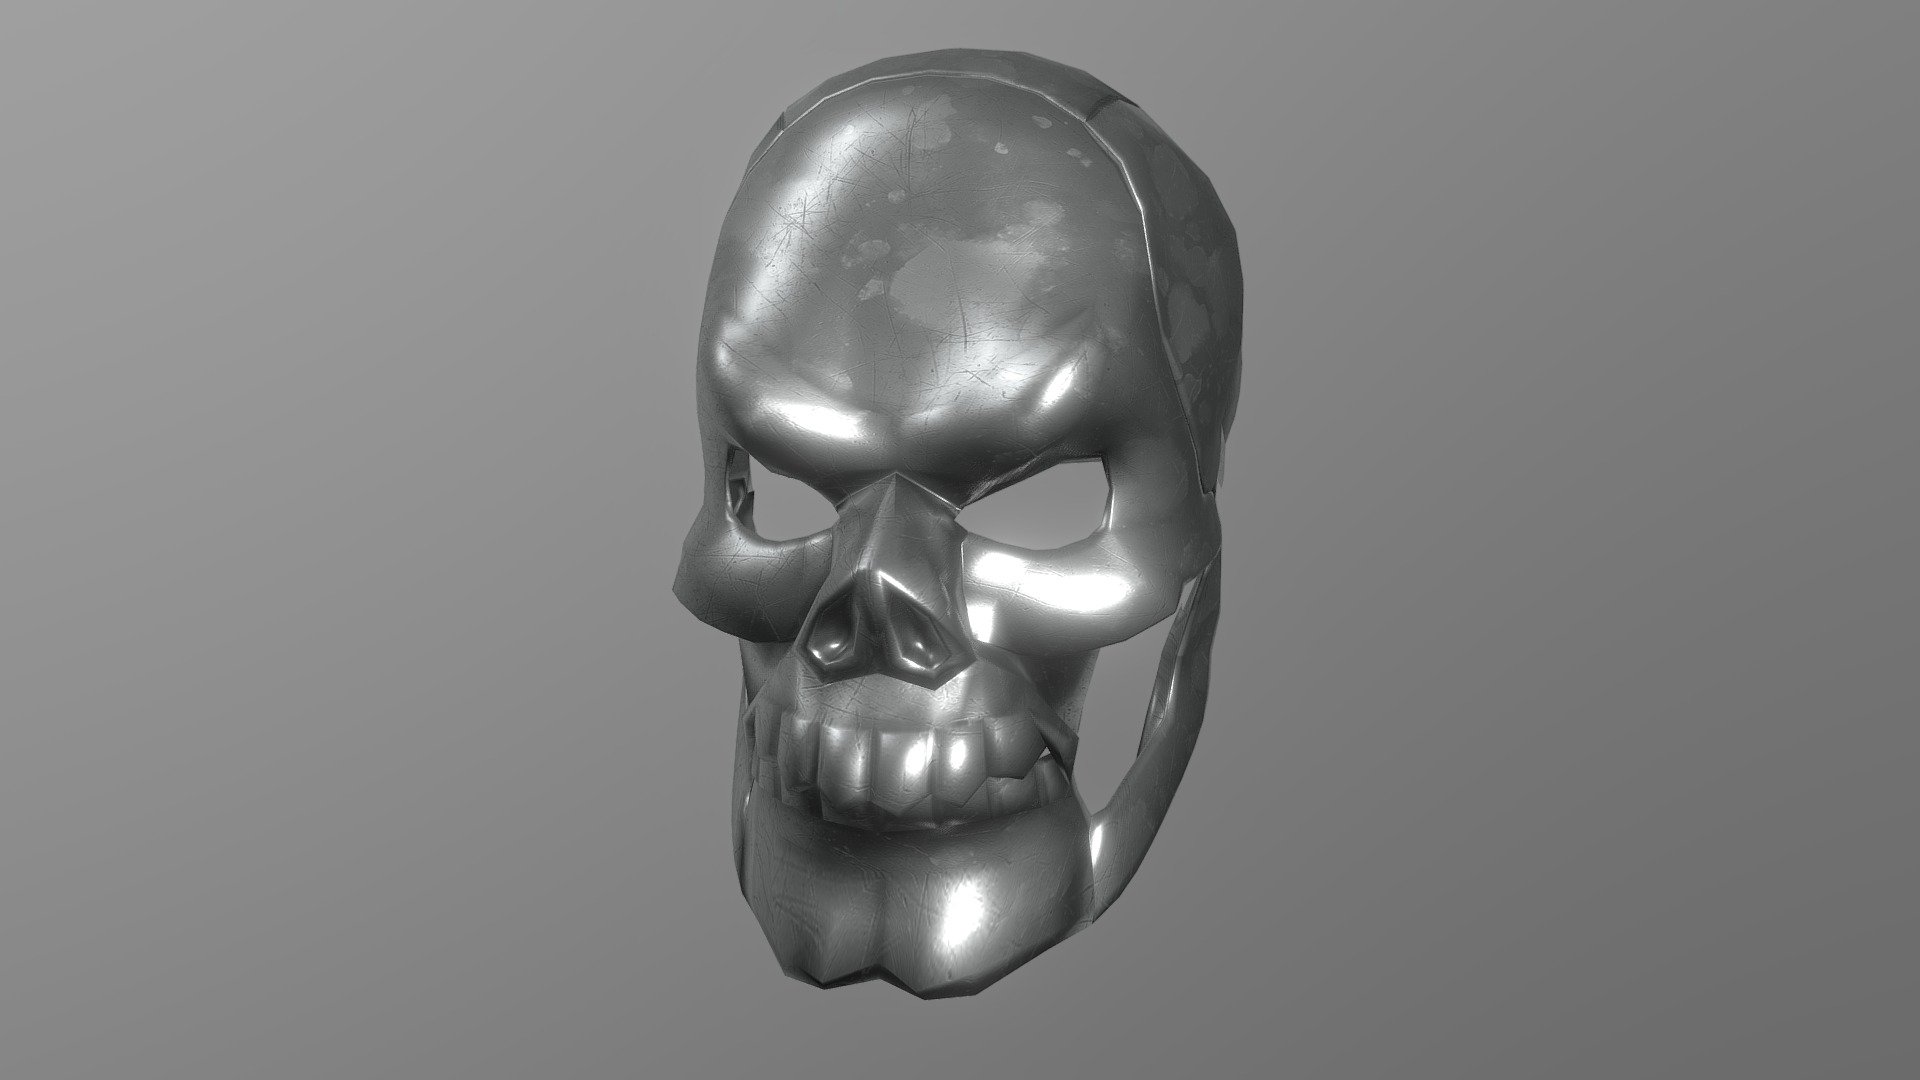 Skull Mask (metal)
Bring your project to life with this mid/low poly 3D model of an Skull Mask. Perfect for use in games, animations, VR, AR, and more, this model is optimized for performance and still retains a high level of detail.


Features



Mid/Low  poly design with 2,101 vertices

16,702 edges

2,038 faces (polygons)

4,016 tris

2k PBR Textures and materials

File formats included: .obj, .fbx, .dae, .stl


Tools Used
This Skull Mask mid/low poly 3D model was created using Blender 3.3.1, a popular and versatile 3D creation software.


Availability
This mid/low poly Skull Mask 3D model is ready for use and available for purchase. Bring your project to the next level with this high-quality and optimized model 3d model